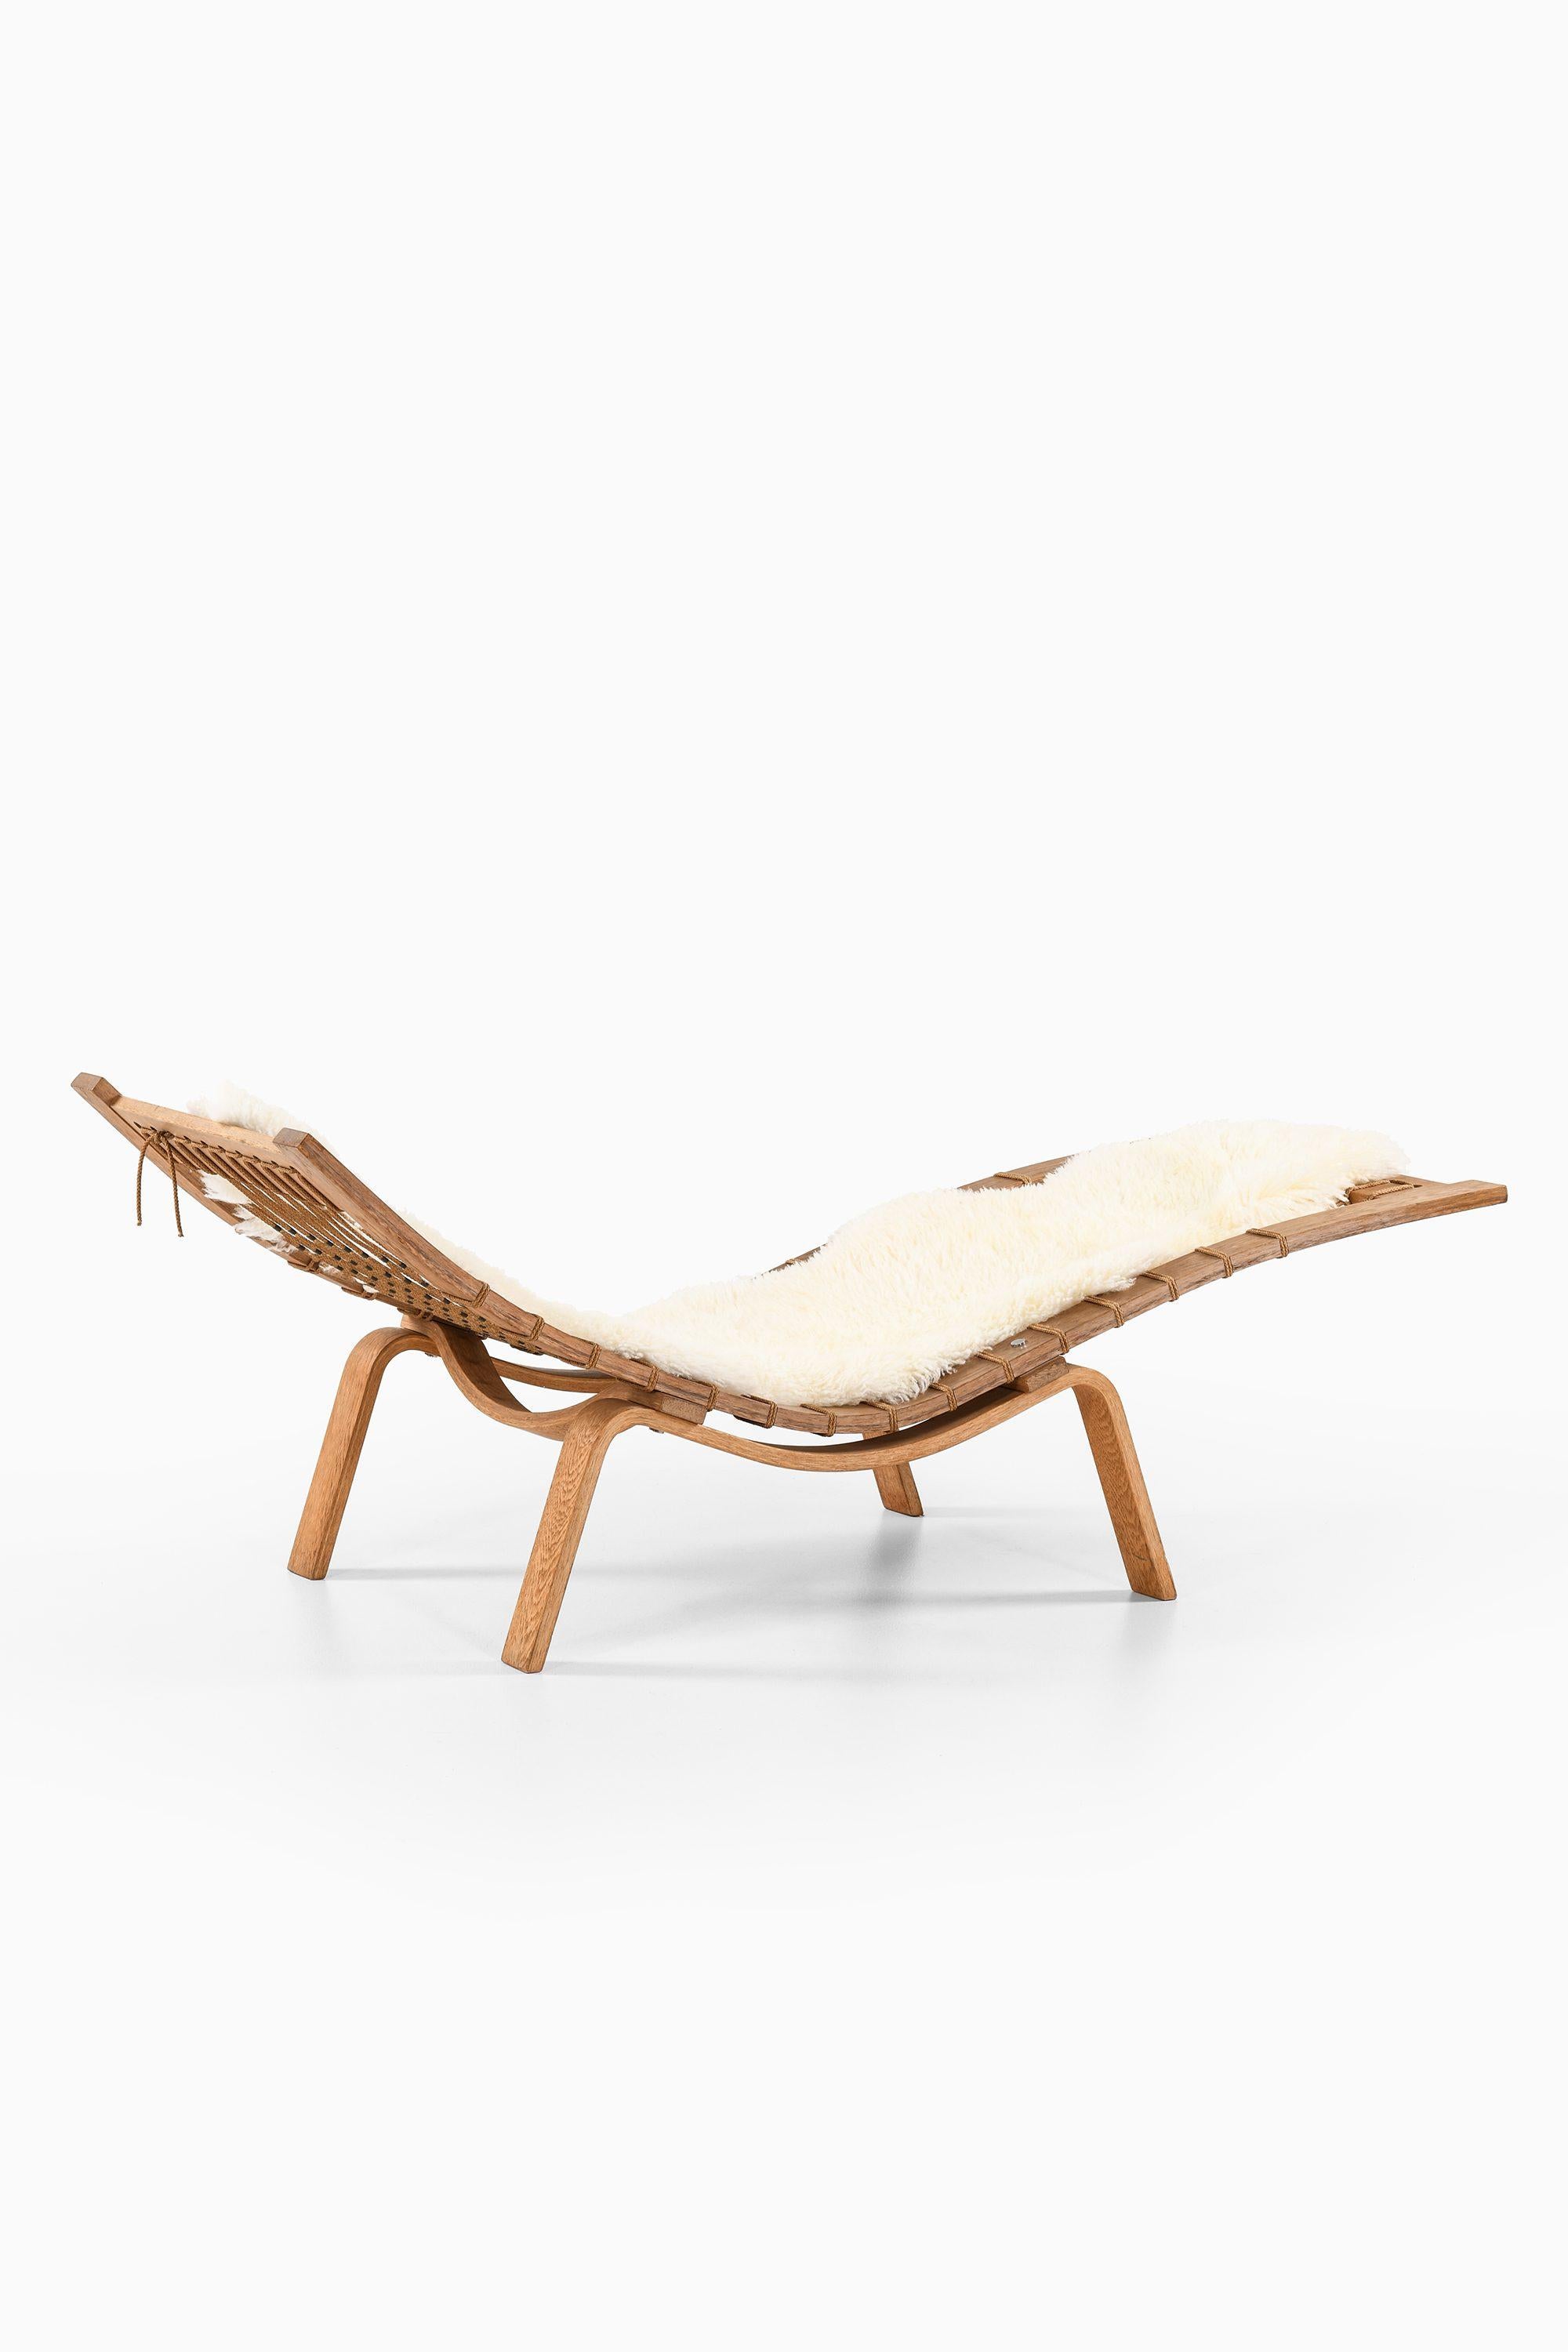 Lounge Chair in Oak and Sheepskin by Hans Wegner, circa 1960s

Additional Information:
Material: Oak, flagline, sheepskin
Style: midcentury, Scandinavia
Very Rare Lounge Chair Model GE-2
Produced by GETAMA in Denmark
Dimensions (W x D x H):